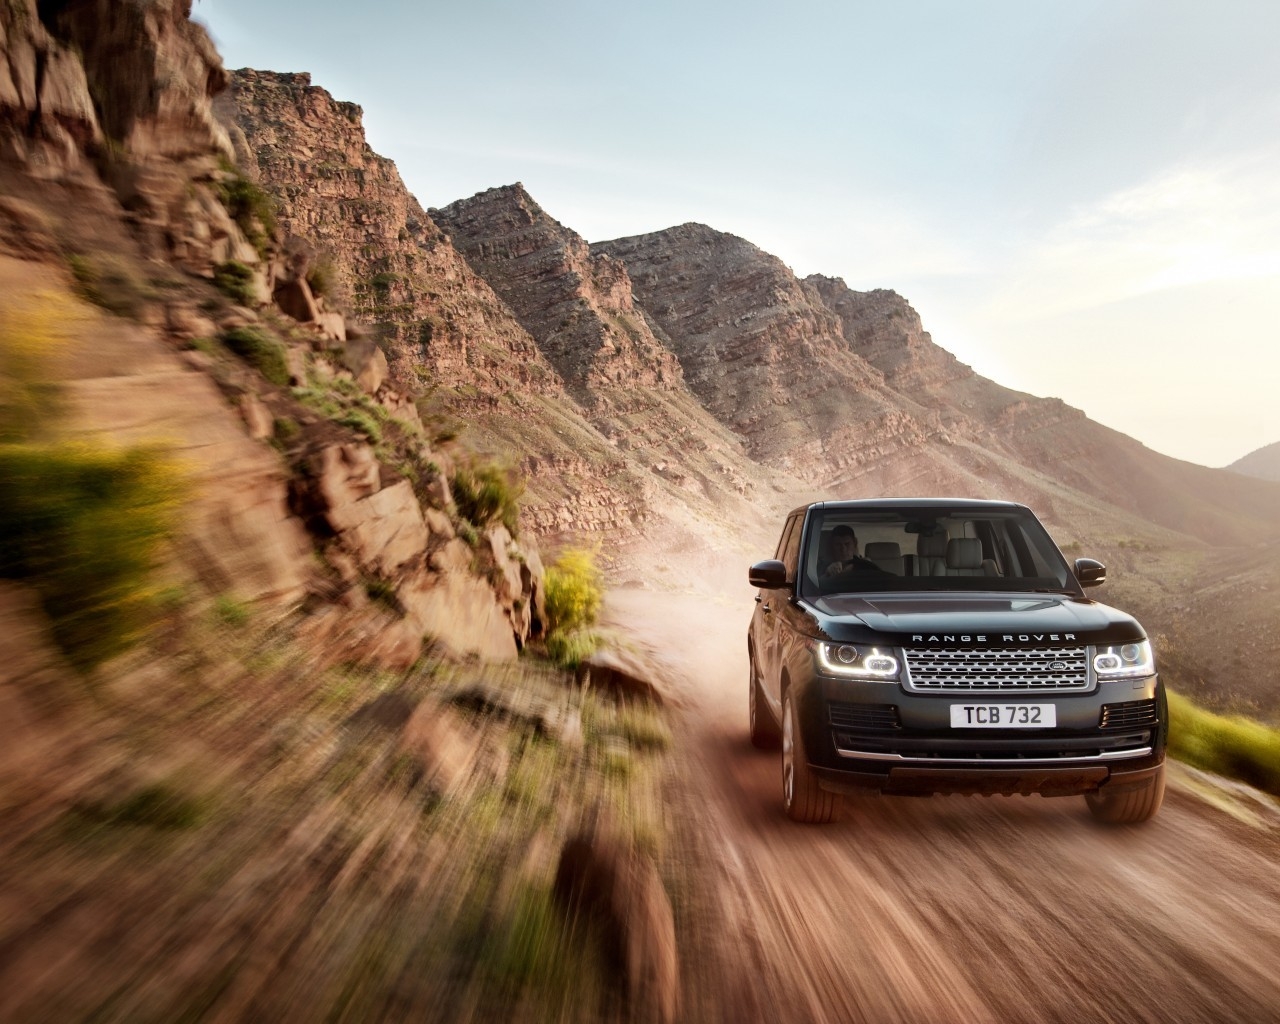 New Black Range Rover on Speed for 1280 x 1024 resolution